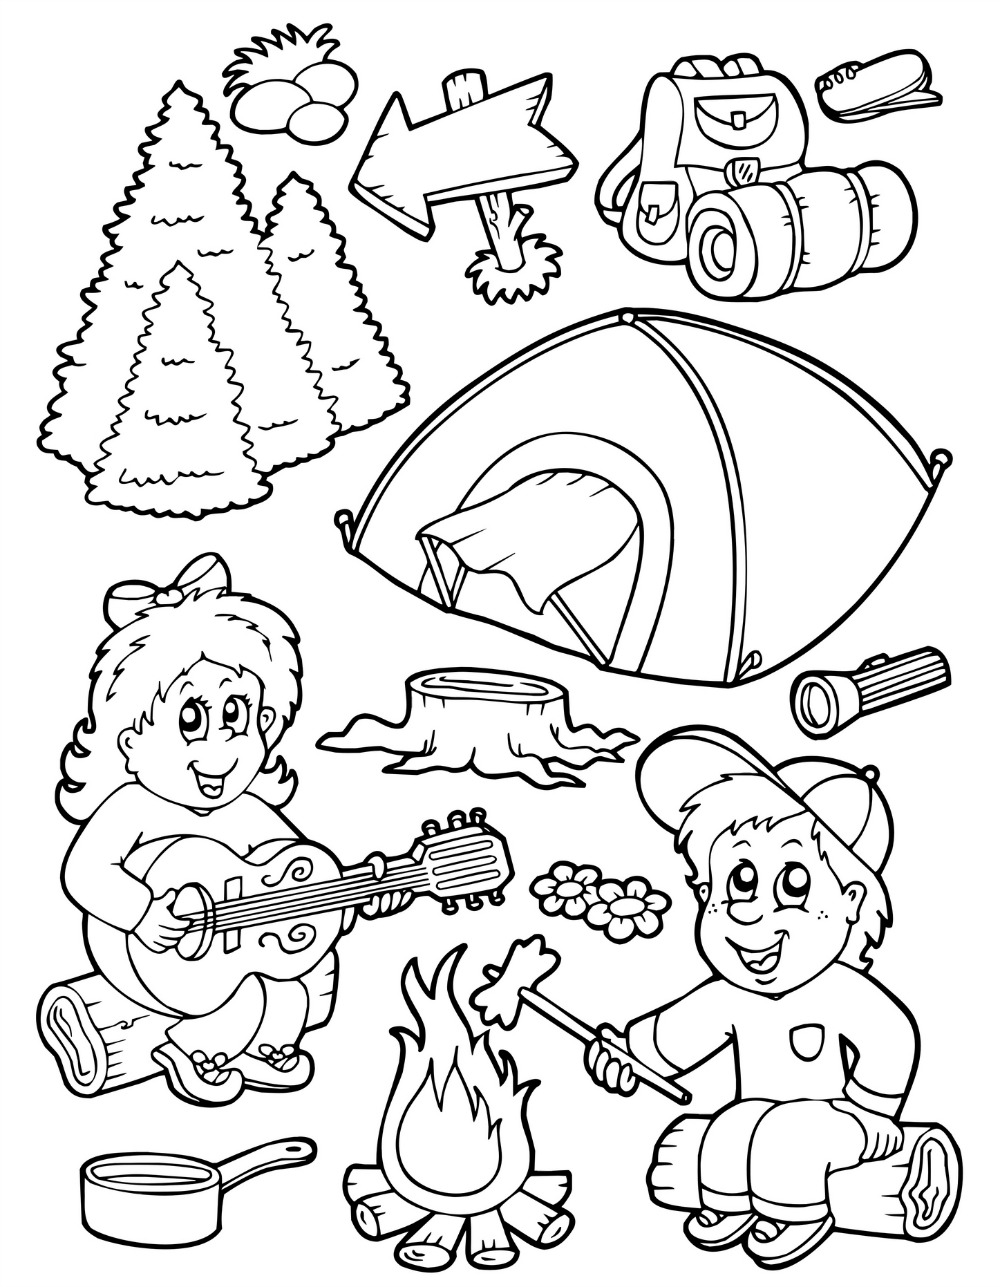 319 Cute Camping Coloring Pages To Print with Printable